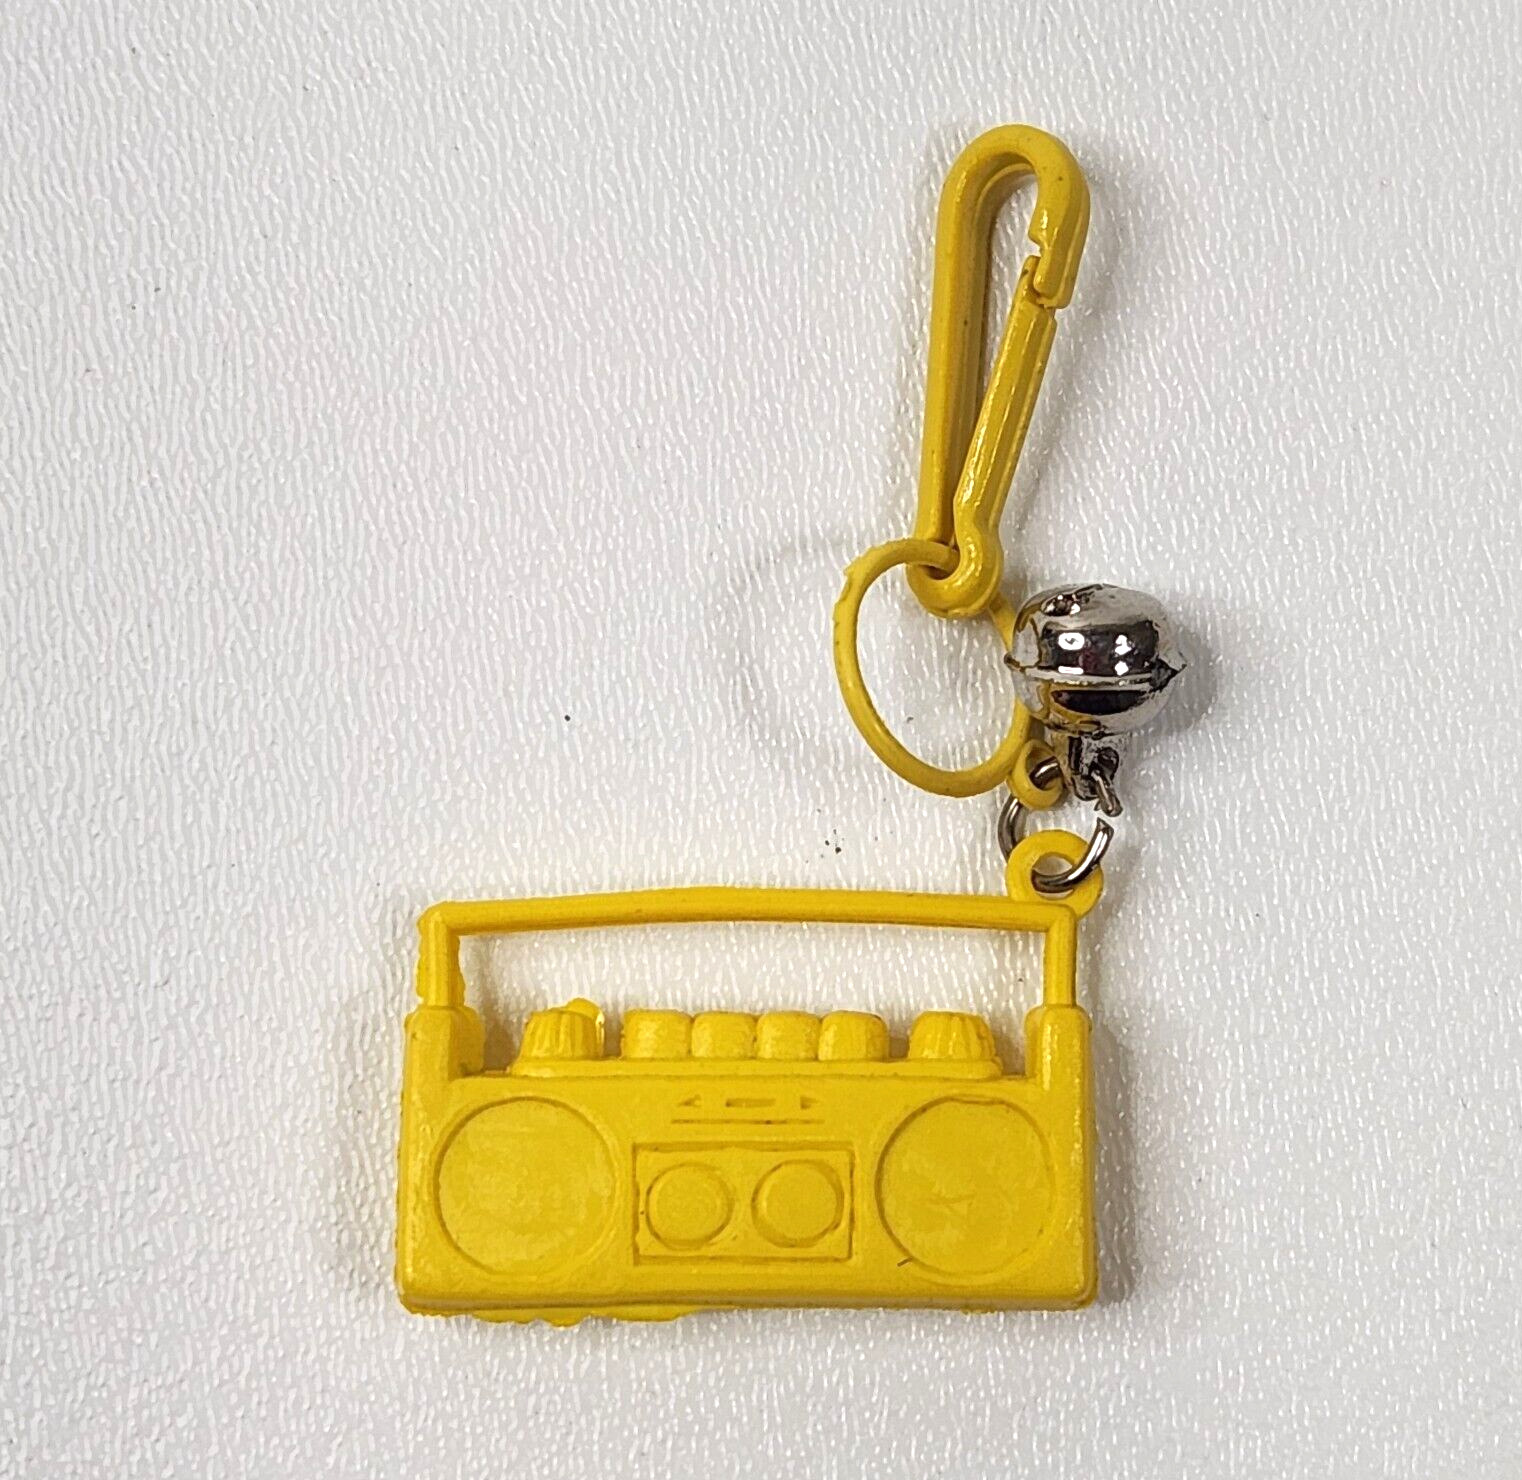 Vintage 1980s Plastic Bell Charm Portable Radio For 80s Necklace